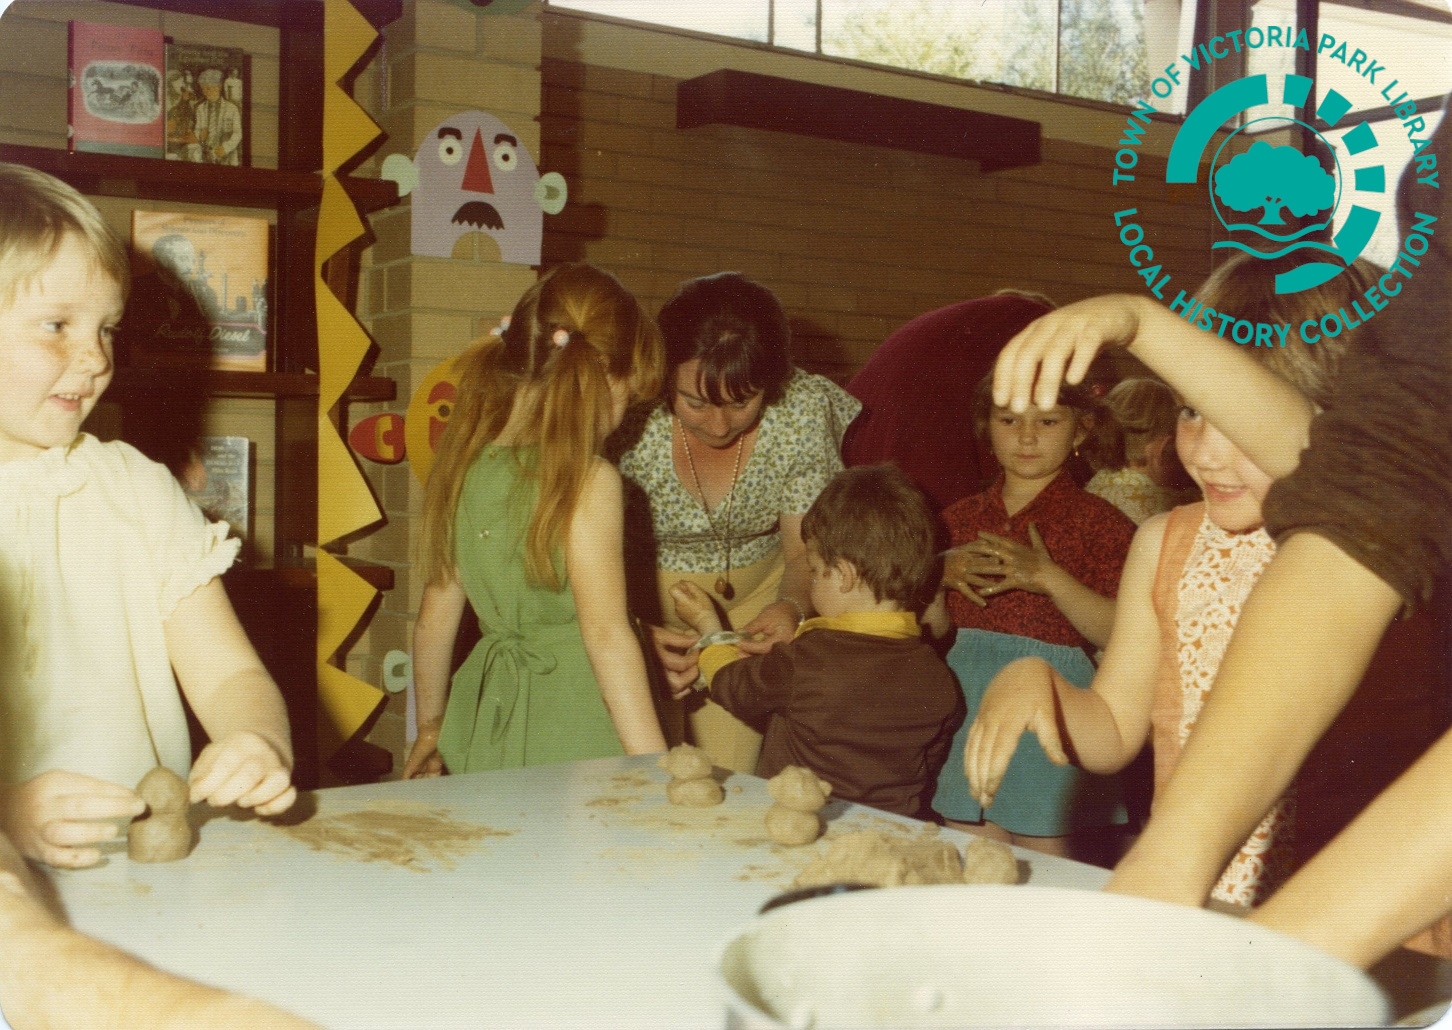 PH00039-08 Children's activity modelling clay at Victoria Park Library (Mint Street) c 1973 1975 Image